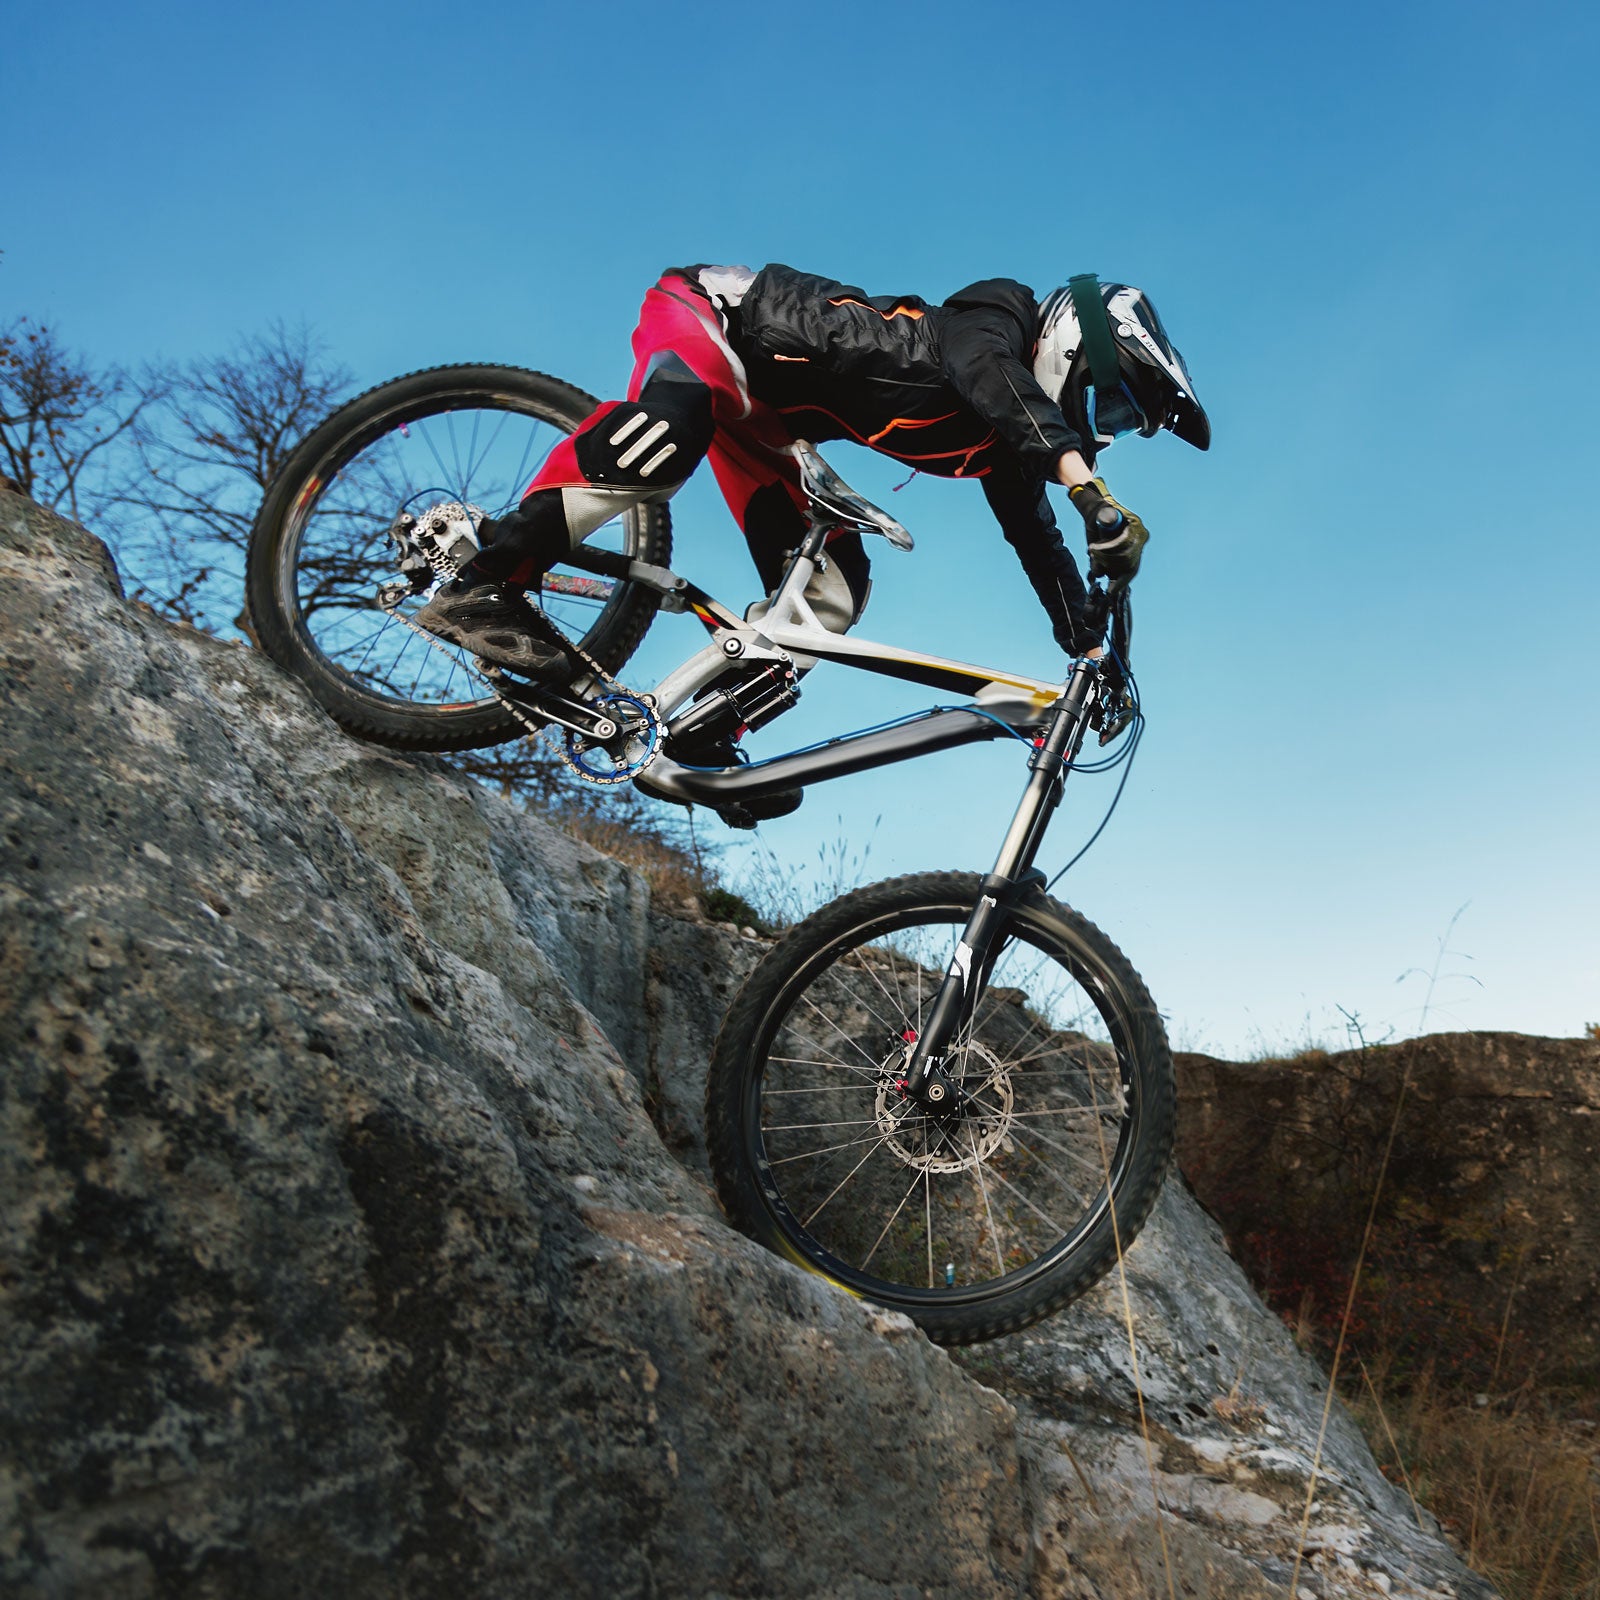 Why You Should Let Your Kids Do Extreme Sports